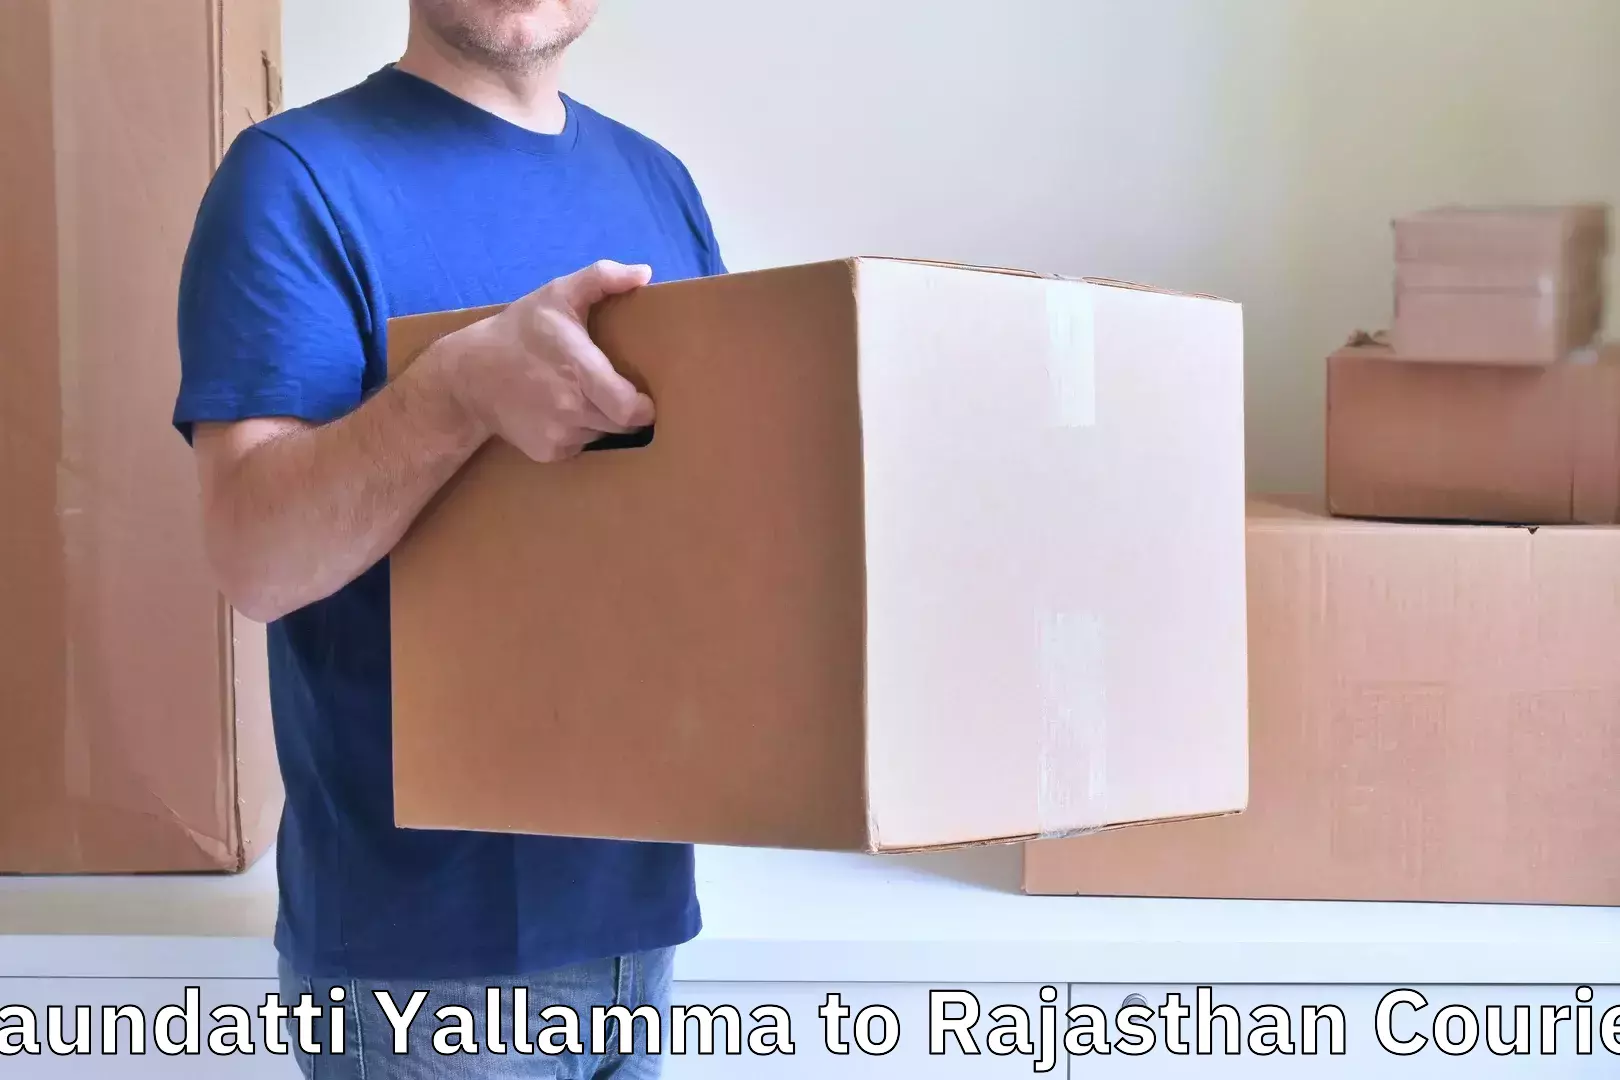 Baggage delivery management Saundatti Yallamma to Lalsot